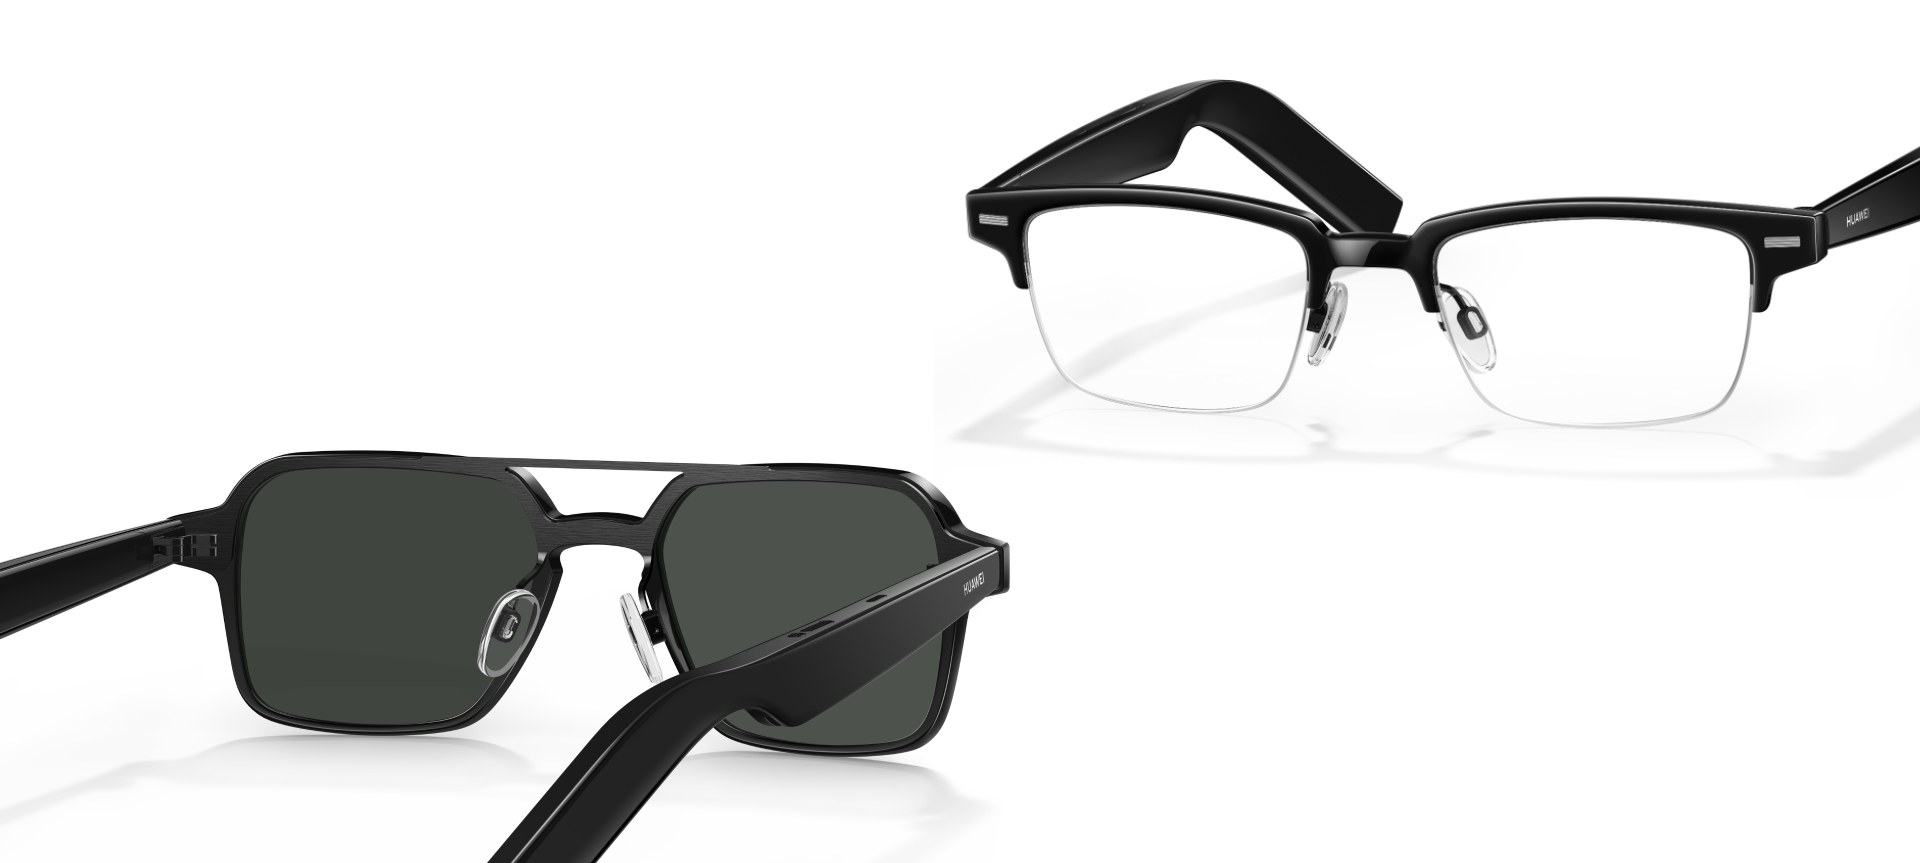 Huawei Eyewear 2 smart glasses with speakers and Zeiss lenses have made their global debut